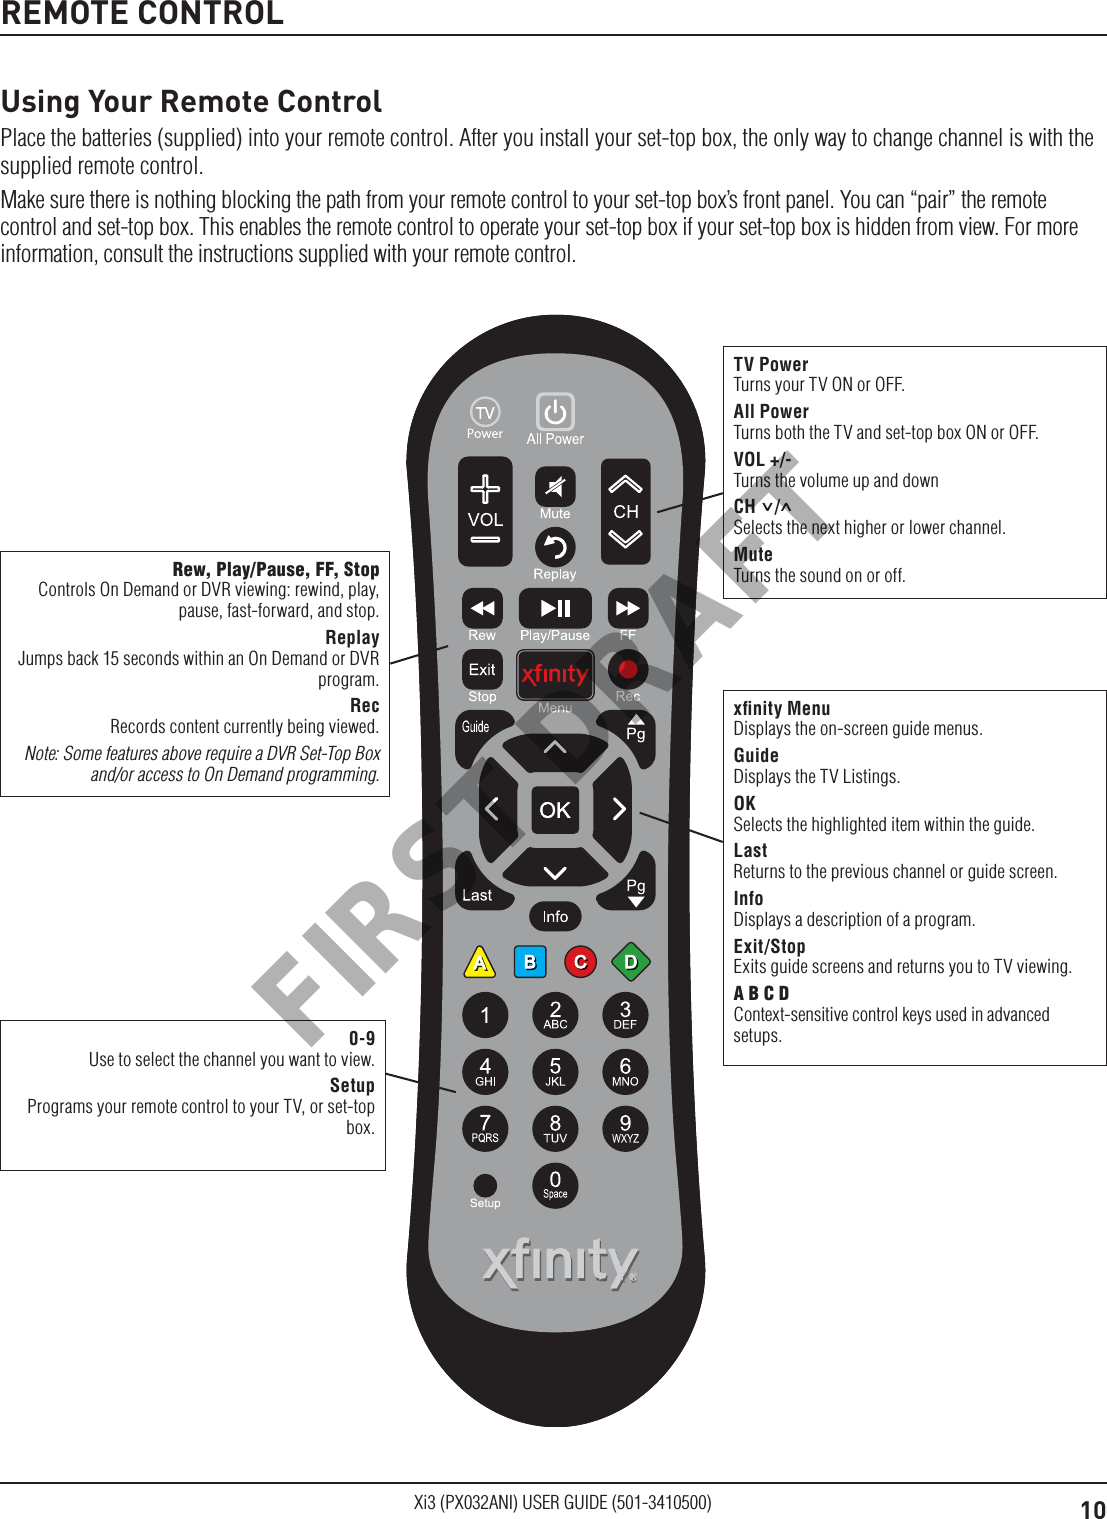 10Xi3 (PX032ANI) USER GUIDE (501-3410500)REMOTE CONTROLRew, Play/Pause, FF, StopControls On Demand or DVR viewing: rewind, play, pause, fast-forward, and stop.ReplayJumps back 15 seconds within an On Demand or DVR program.RecRecords content currently being viewed.Note: Some features above require a DVR Set-Top Box and/or access to On Demand programming.xﬁnity MenuDisplays the on-screen guide menus.GuideDisplays the TV Listings.OKSelects the highlighted item within the guide.LastReturns to the previous channel or guide screen.InfoDisplays a description of a program.Exit/StopExits guide screens and returns you to TV viewing.A B C DContext-sensitive control keys used in advanced setups.0-9Use to select the channel you want to view.SetupPrograms your remote control to your TV, or set-top box.Using Your Remote ControlPlace the batteries (supplied) into your remote control. After you install your set-top box, the only way to change channel is with the supplied remote control.Make sure there is nothing blocking the path from your remote control to your set-top box’s front panel. You can “pair” the remote control and set-top box. This enables the remote control to operate your set-top box if your set-top box is hidden from view. For more information, consult the instructions supplied with your remote control.TV PowerTurns your TV ON or OFF.All PowerTurns both the TV and set-top box ON or OFF.VOL +/-Turns the volume up and downCH    / Selects the next higher or lower channel.MuteTurns the sound on or off. FIRST DRAFT